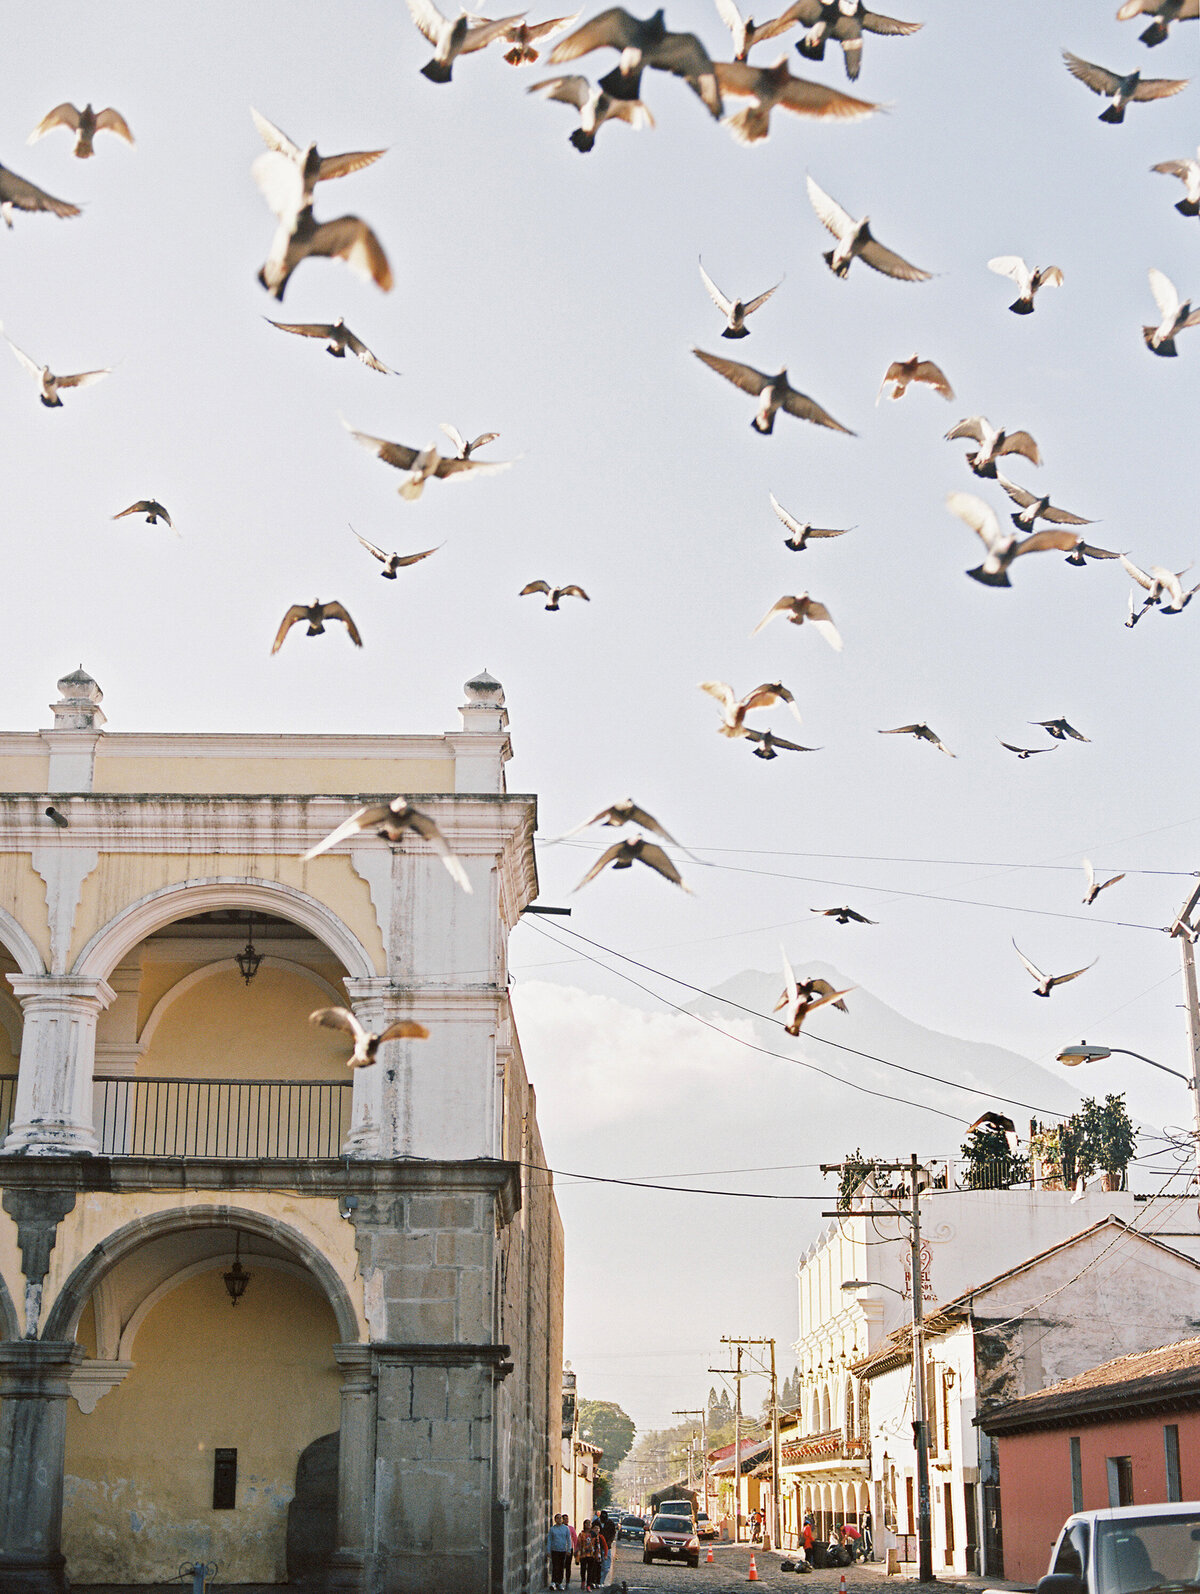 birds fly over ancient city